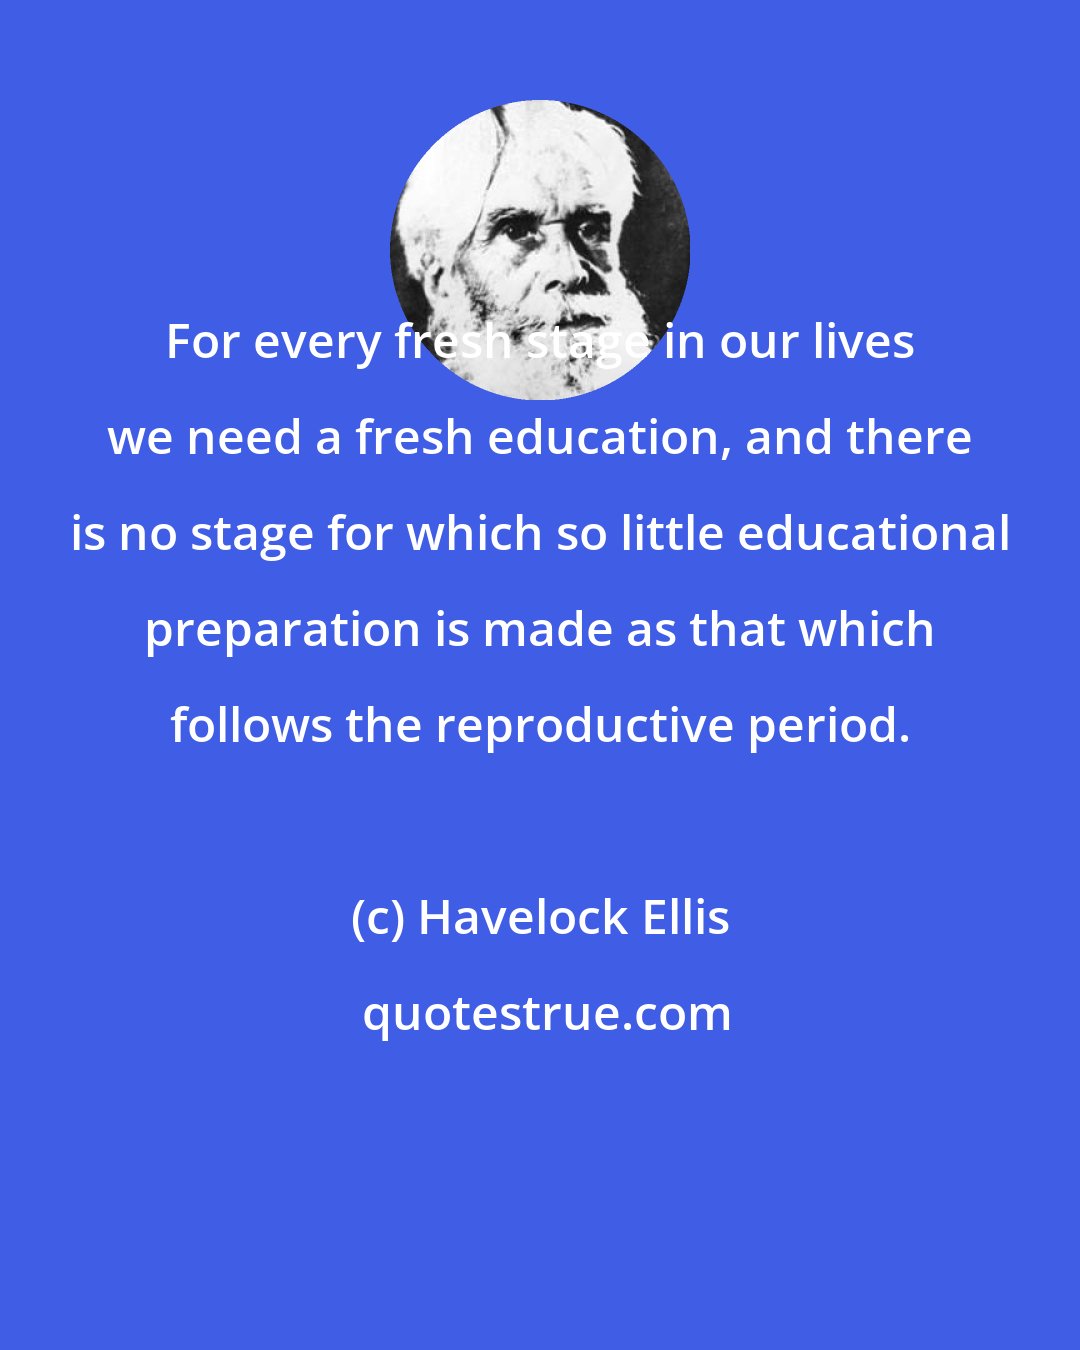 Havelock Ellis: For every fresh stage in our lives we need a fresh education, and there is no stage for which so little educational preparation is made as that which follows the reproductive period.